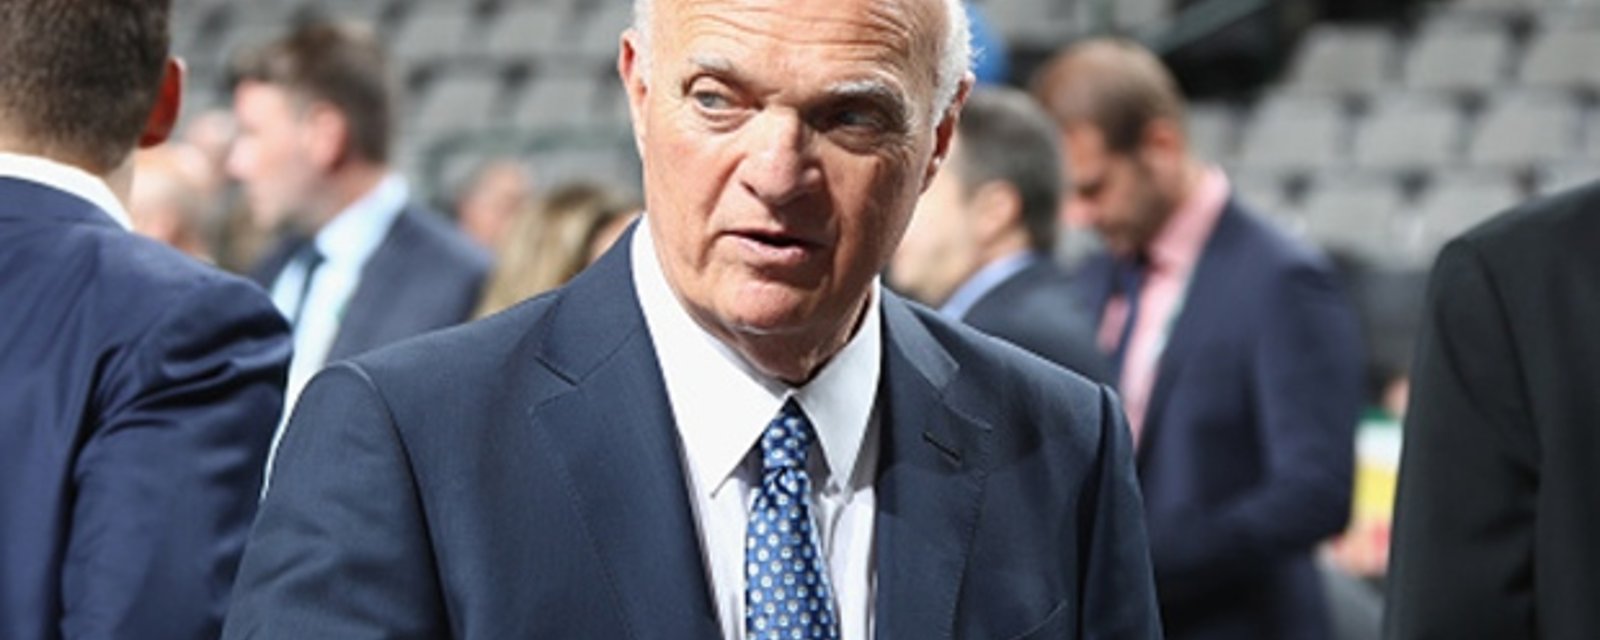 Lou Lamoriello feels responsible for Isles’ struggles and plans monster trades!